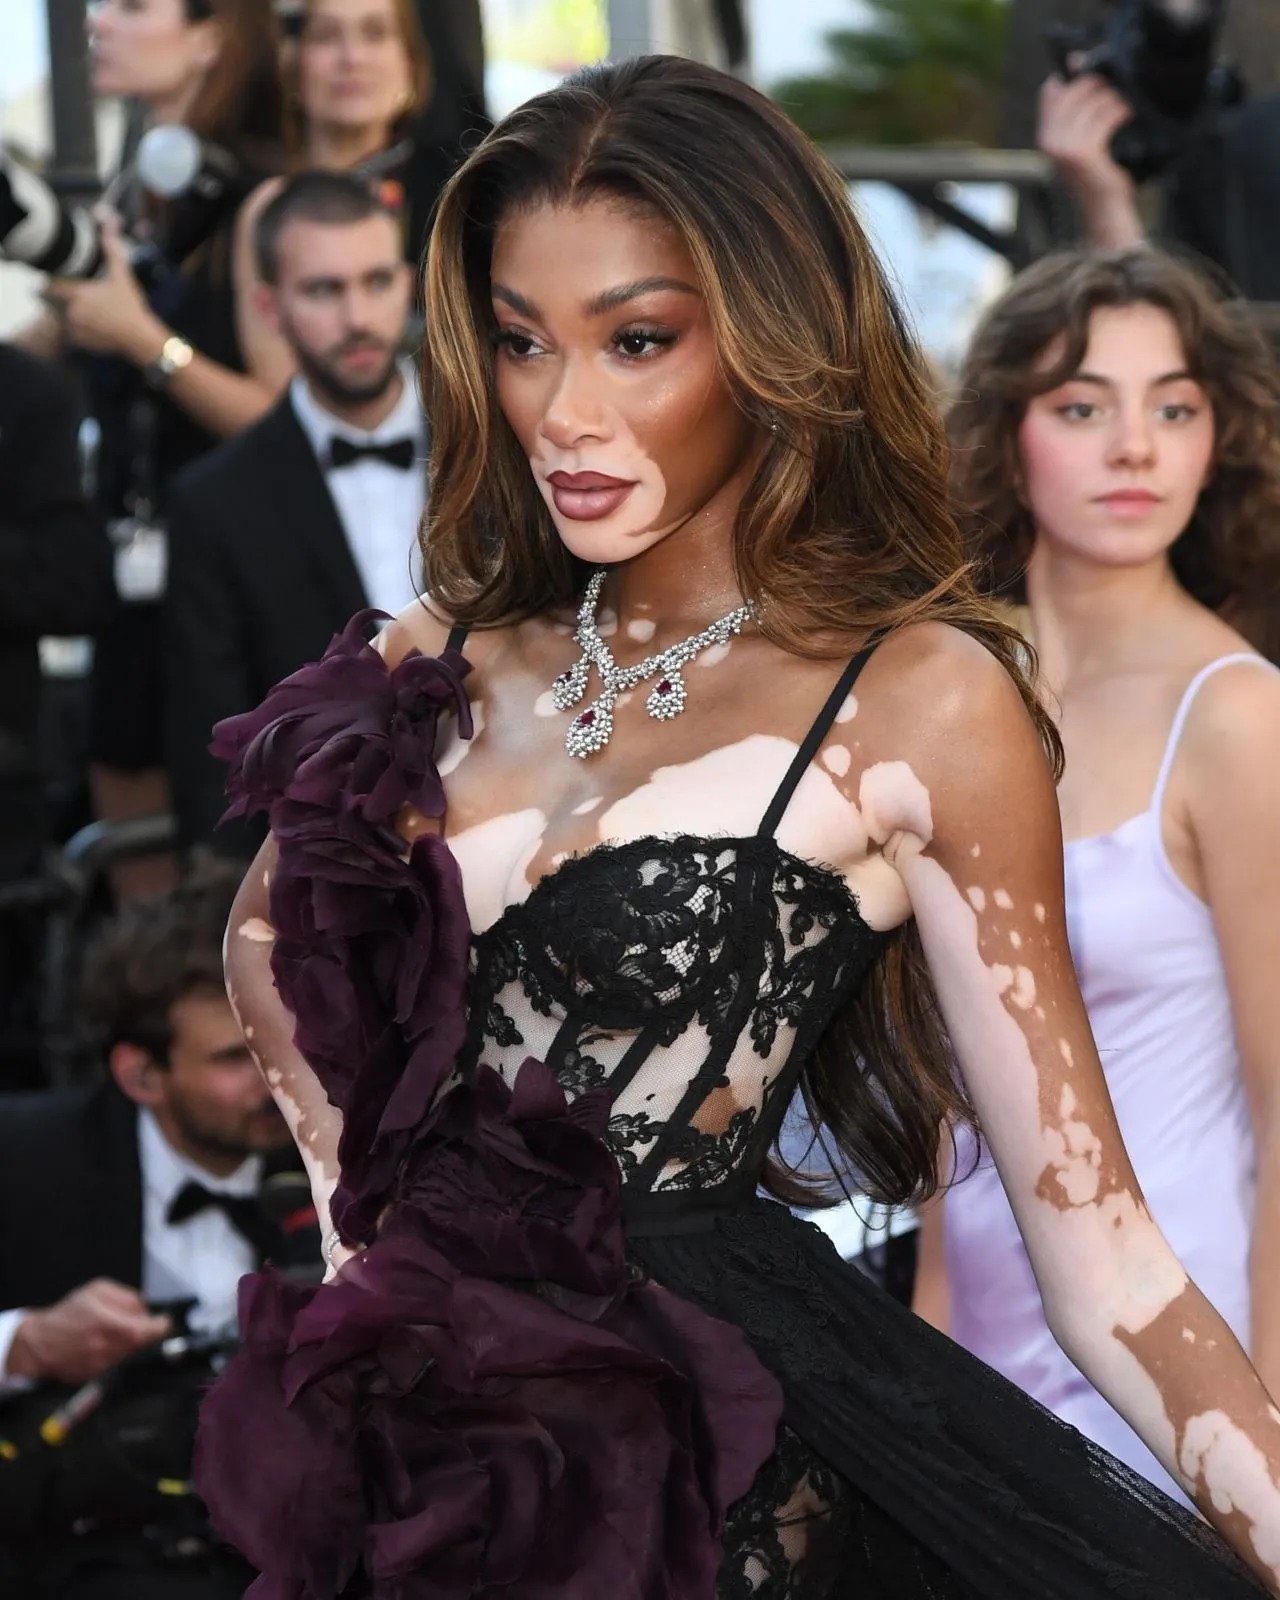 WINNIE HARLOW AT THE COUNT OF MONTE CRISTO PREMIERE AT CANNES FILM FESTIVAL2